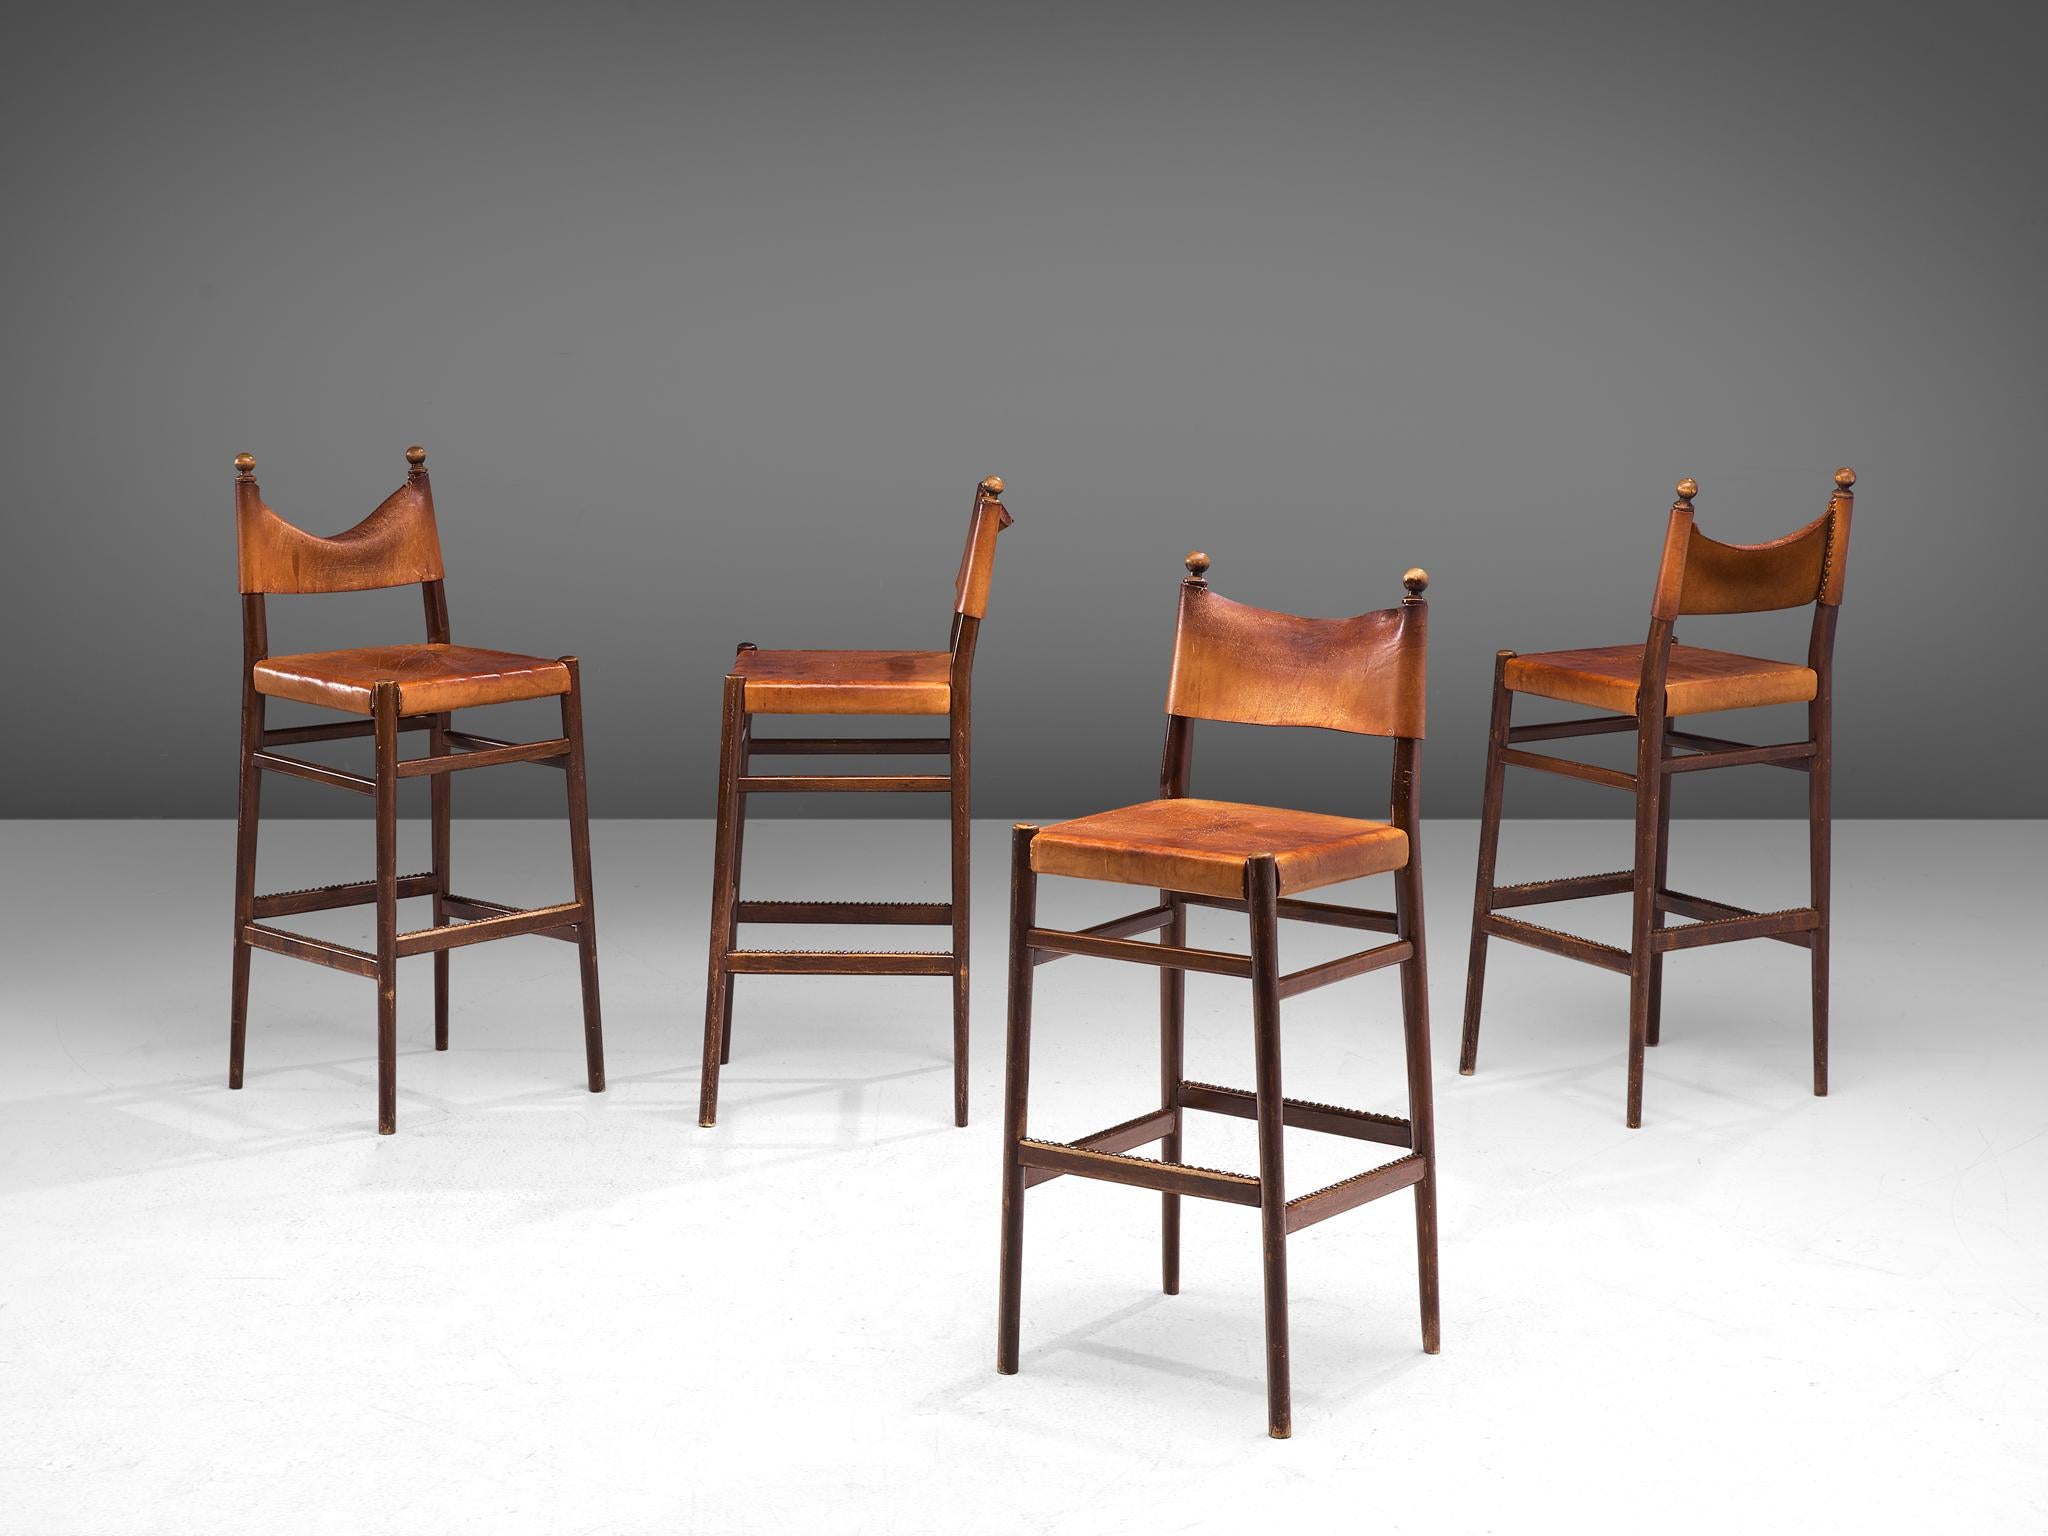 Set of 4 barstools, patinated leather, brass and oak, Scandinavia, 1960s.

Exquisite set of Scandinavian Modern high chairs. The frame is slim and the conical shaped legs are flared positioned from each other. The horizontal slats that connect the